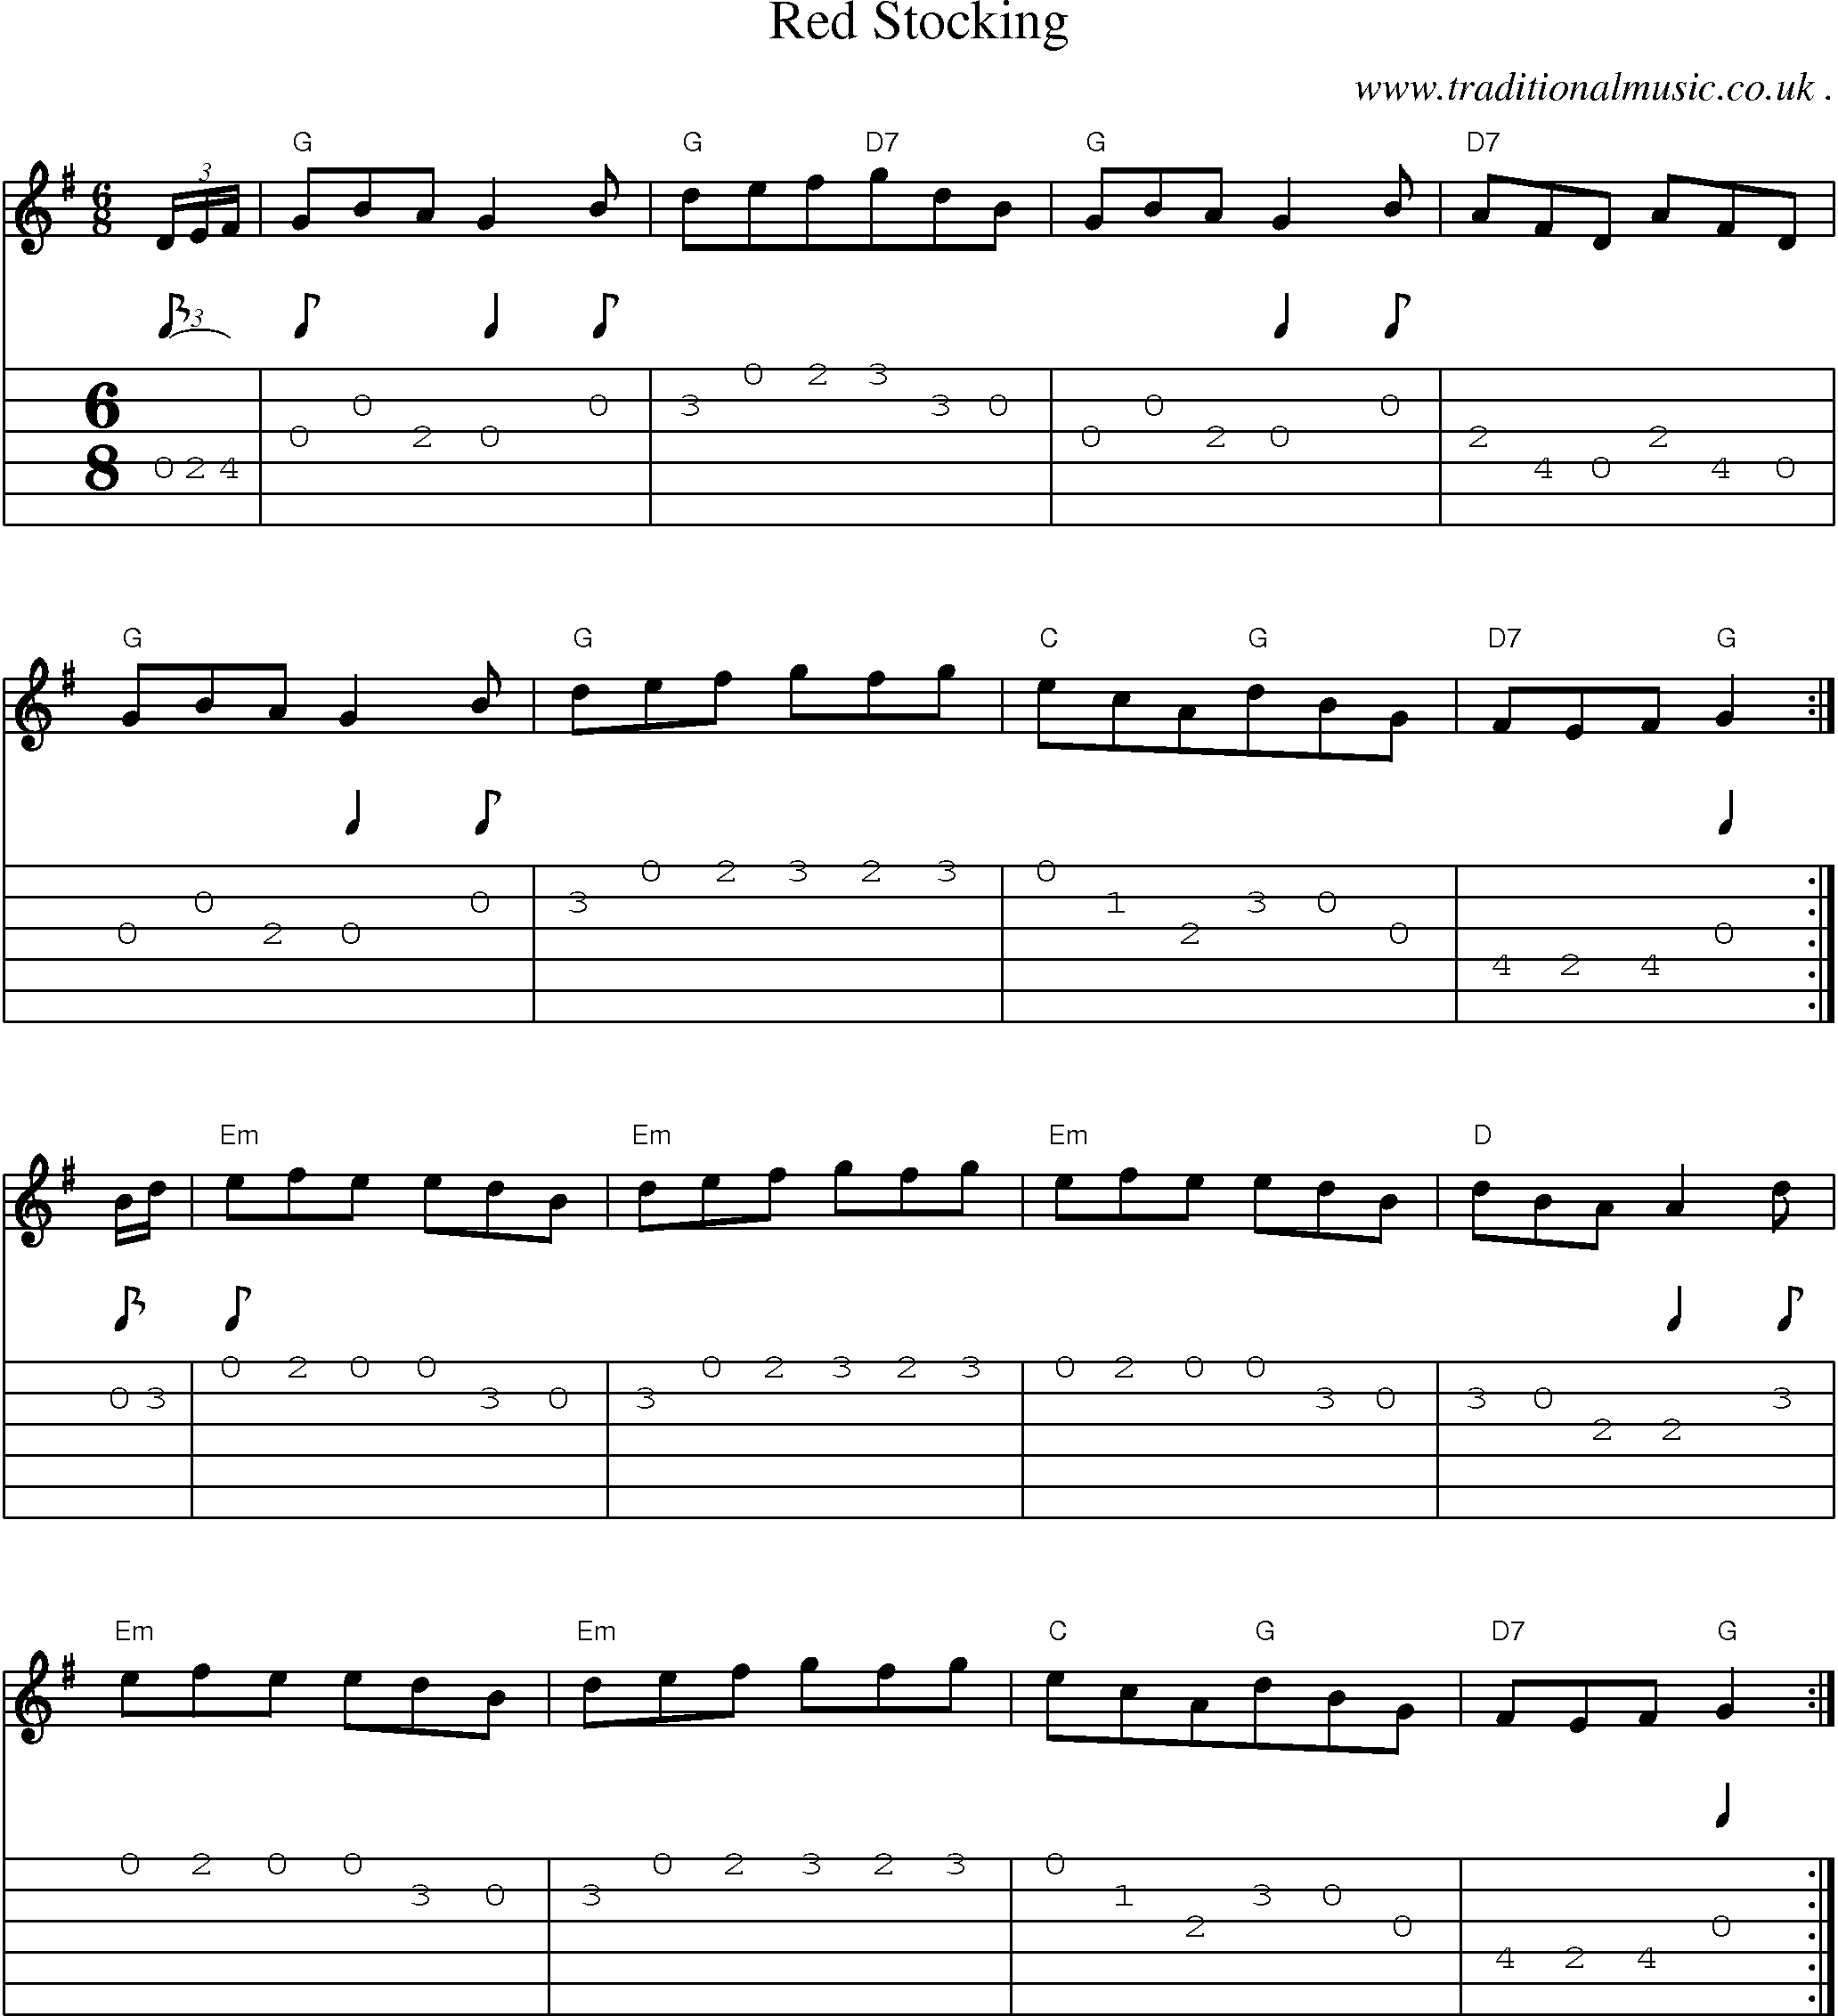 Sheet-Music and Guitar Tabs for Red Stocking